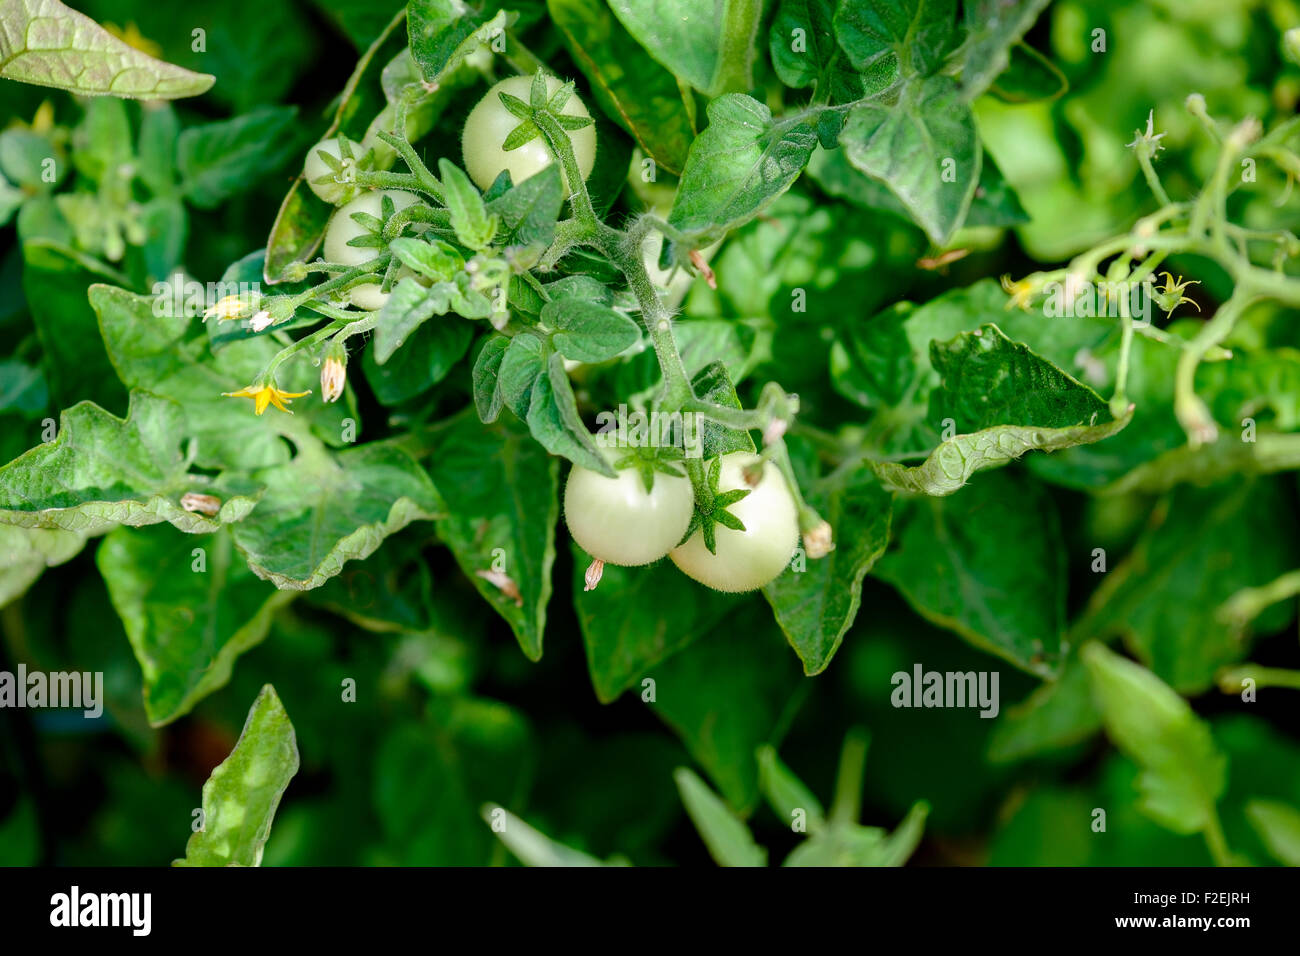 A tomato plant with small, organically grown new green cherry tomatoes, Solanum lycopersicum. Stock Photo